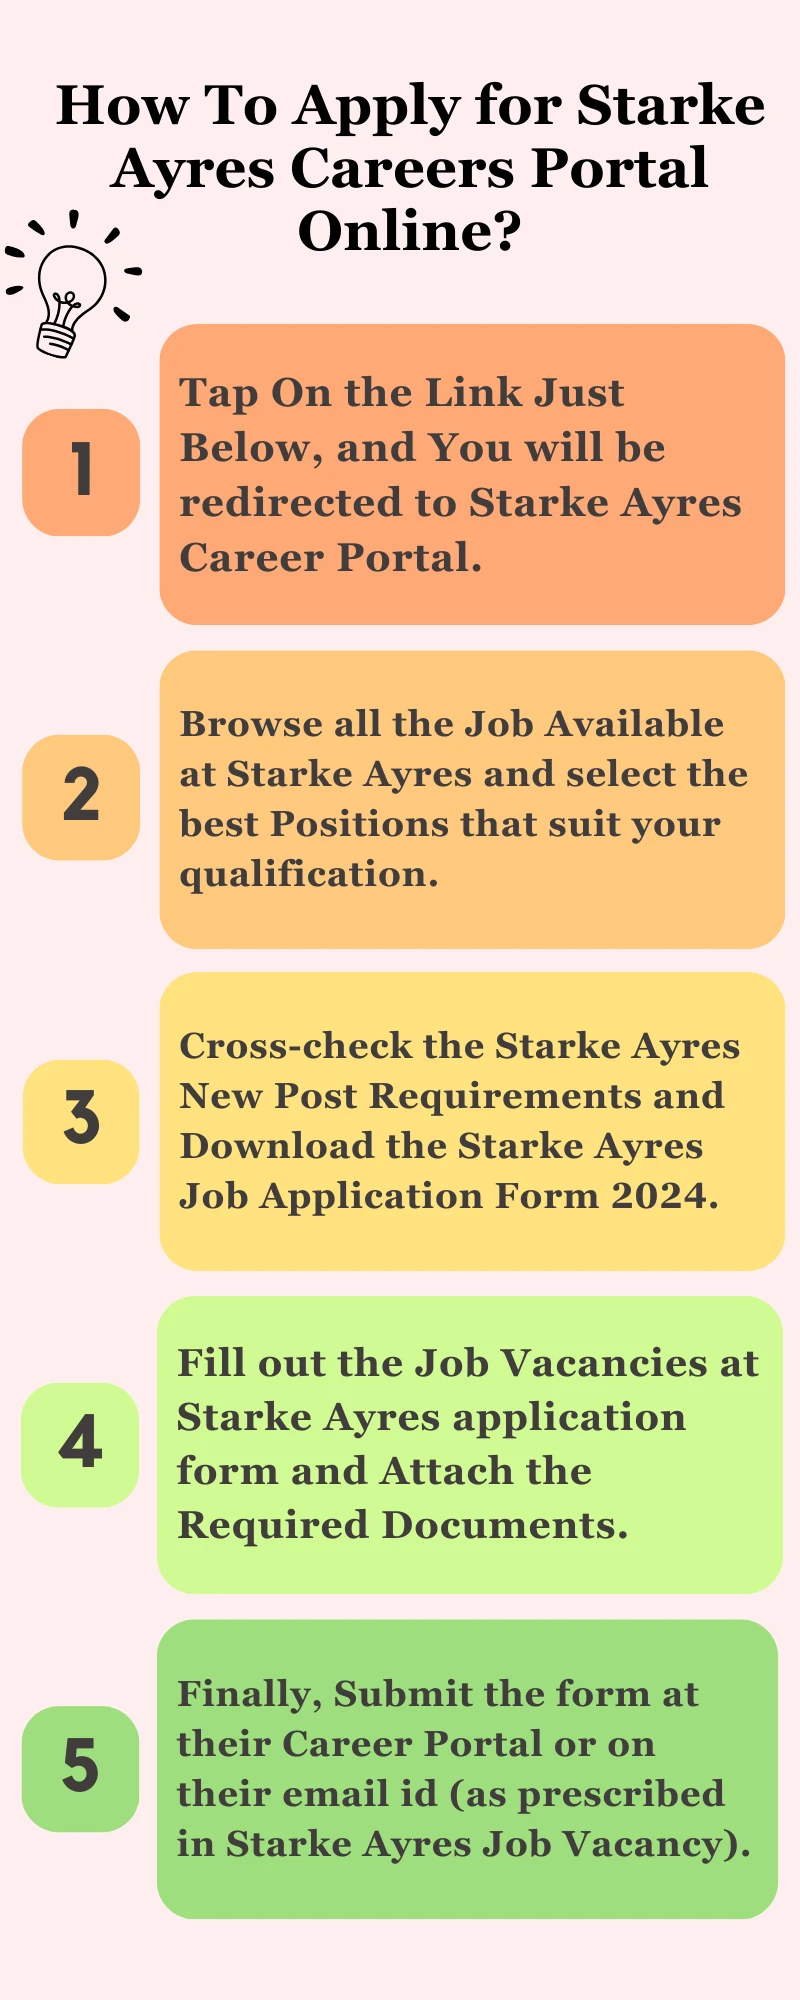 How To Apply for Starke Ayres Careers Portal Online?